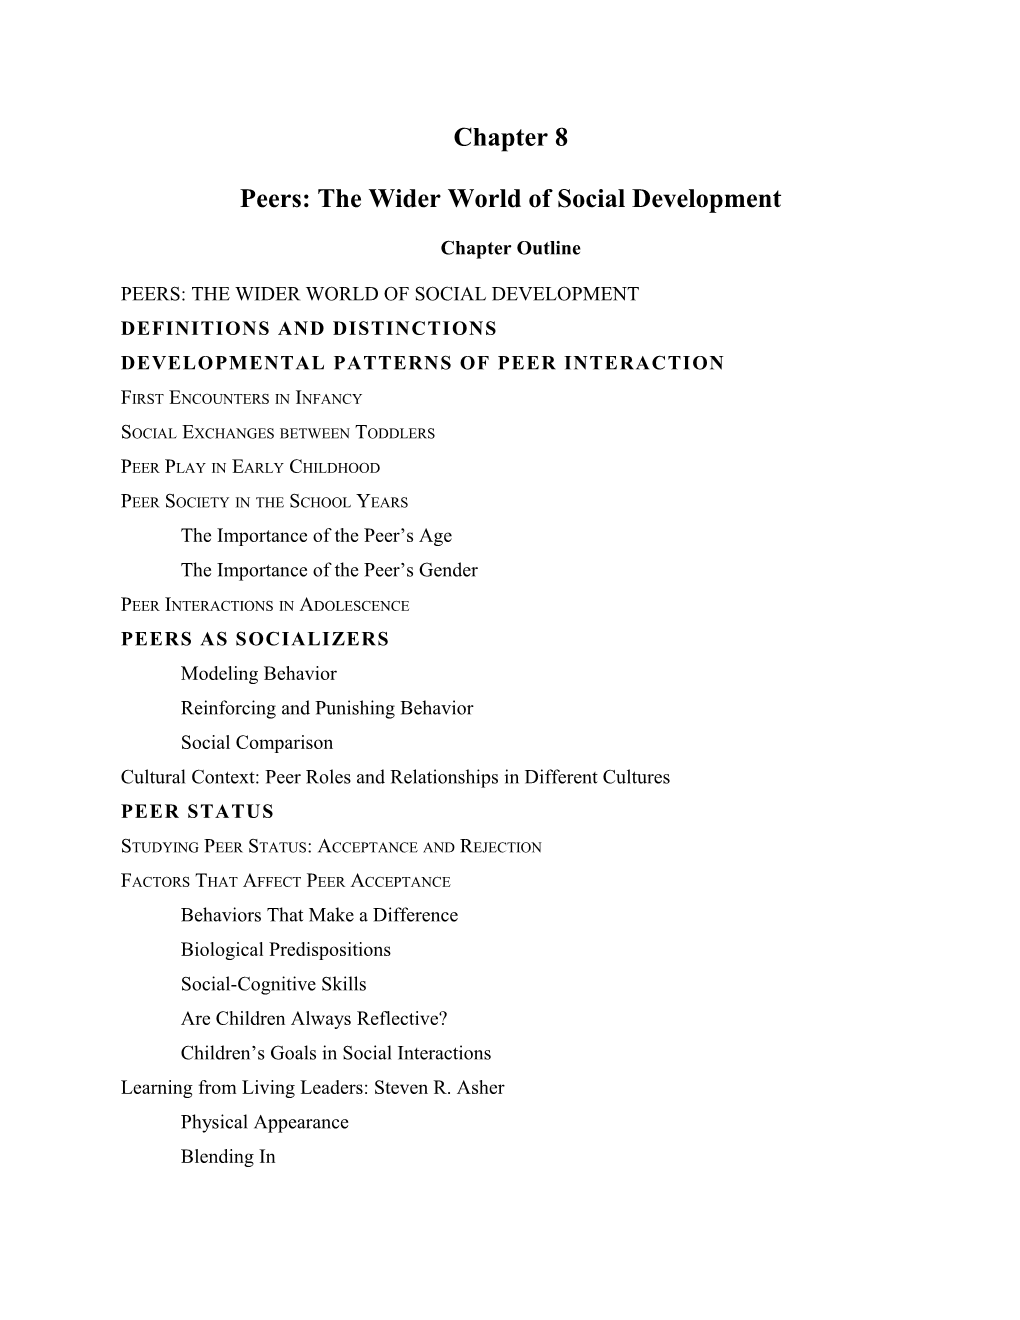 Peers: the Wider World of Social Development